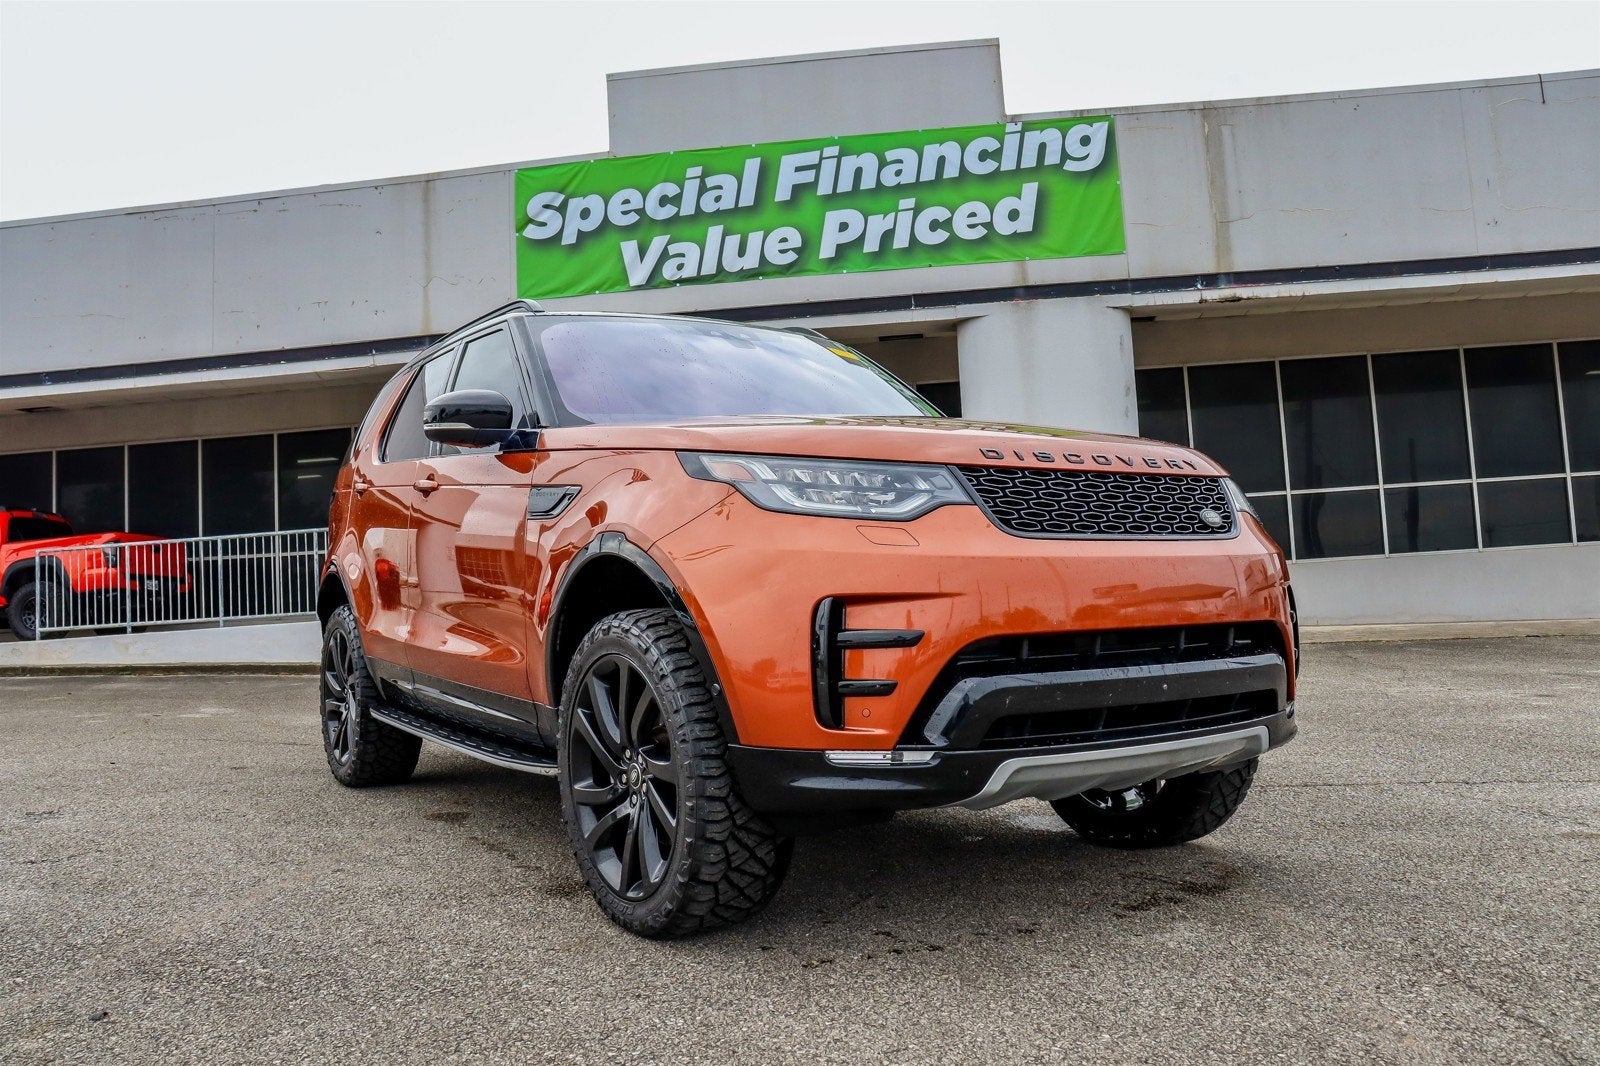 2018 Land Rover Discovery HSE Luxury